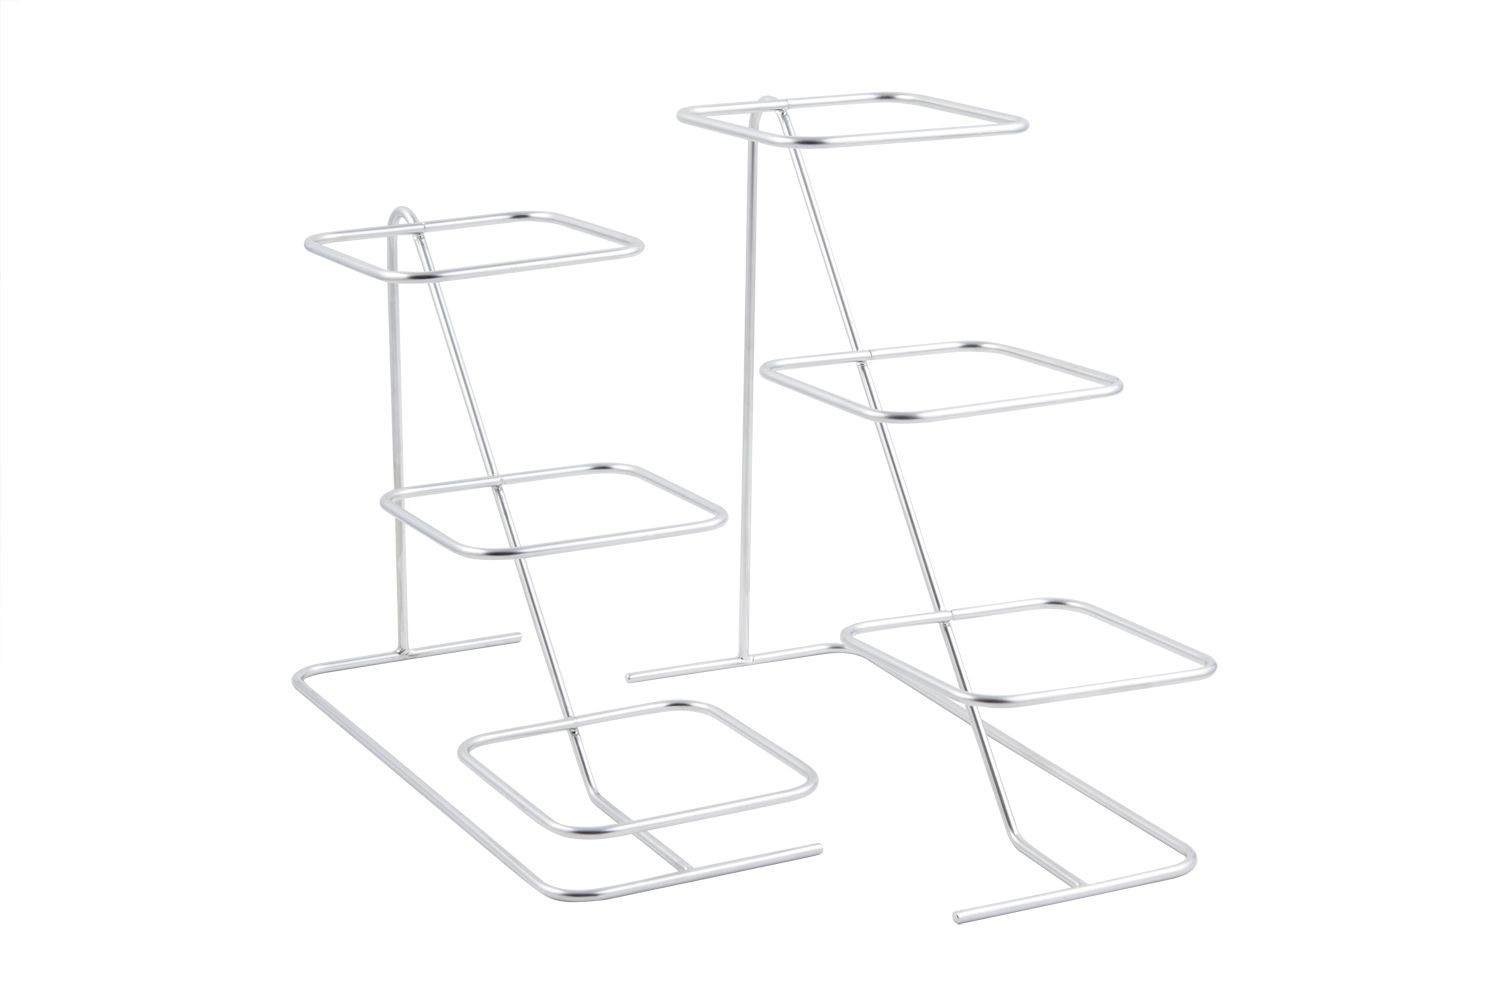 Bon Chef 7011SS Stainless Steel Condiment Stand for (6) 9110, 14 7/8" x 12 9/32" and 15 1/6" x 14 5/8"